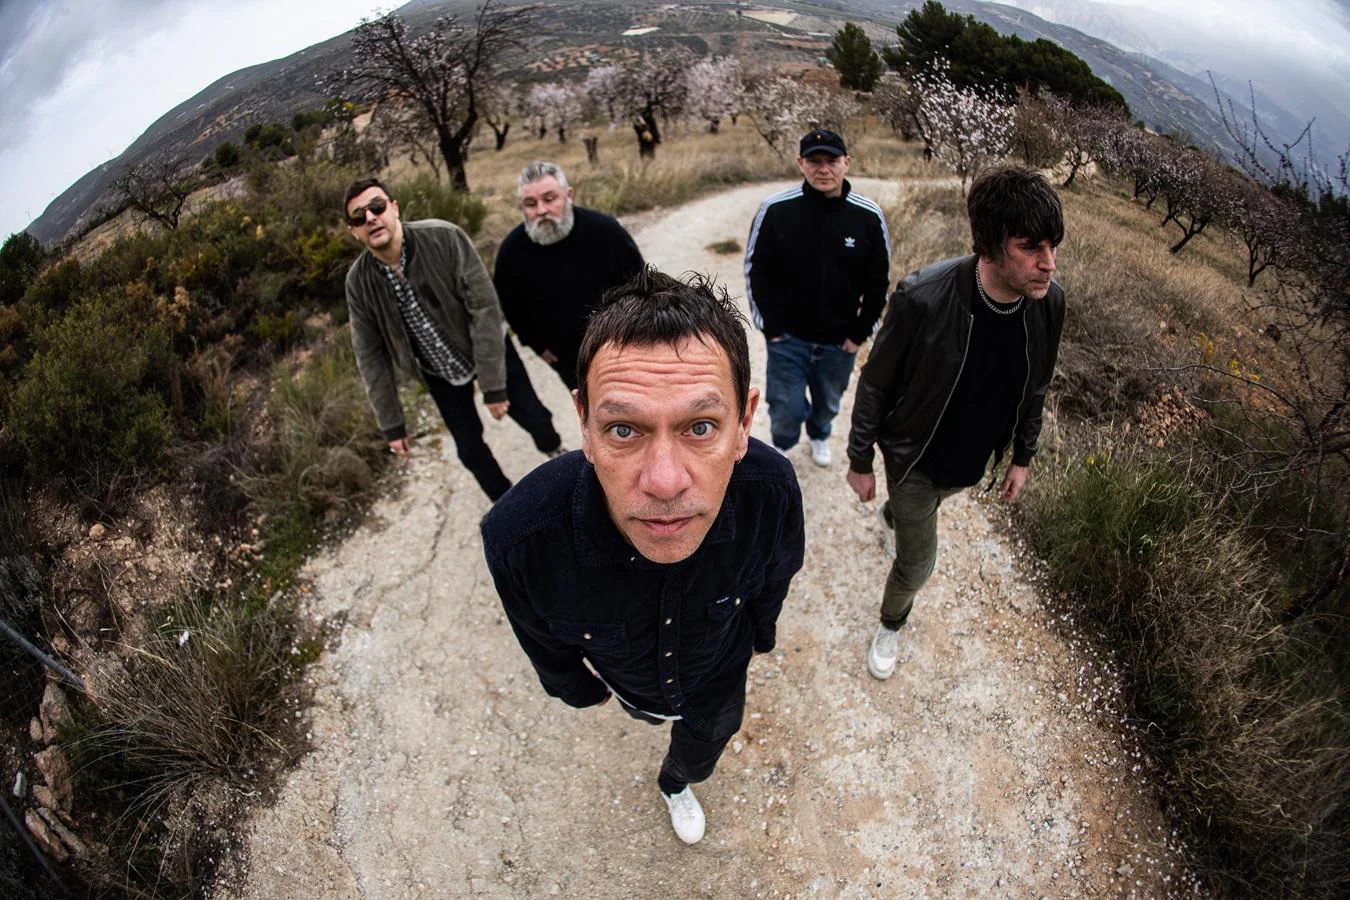 INTERVIEW: Rick Witter on Shed Seven’s Latest Album ‘A Matter of Time’